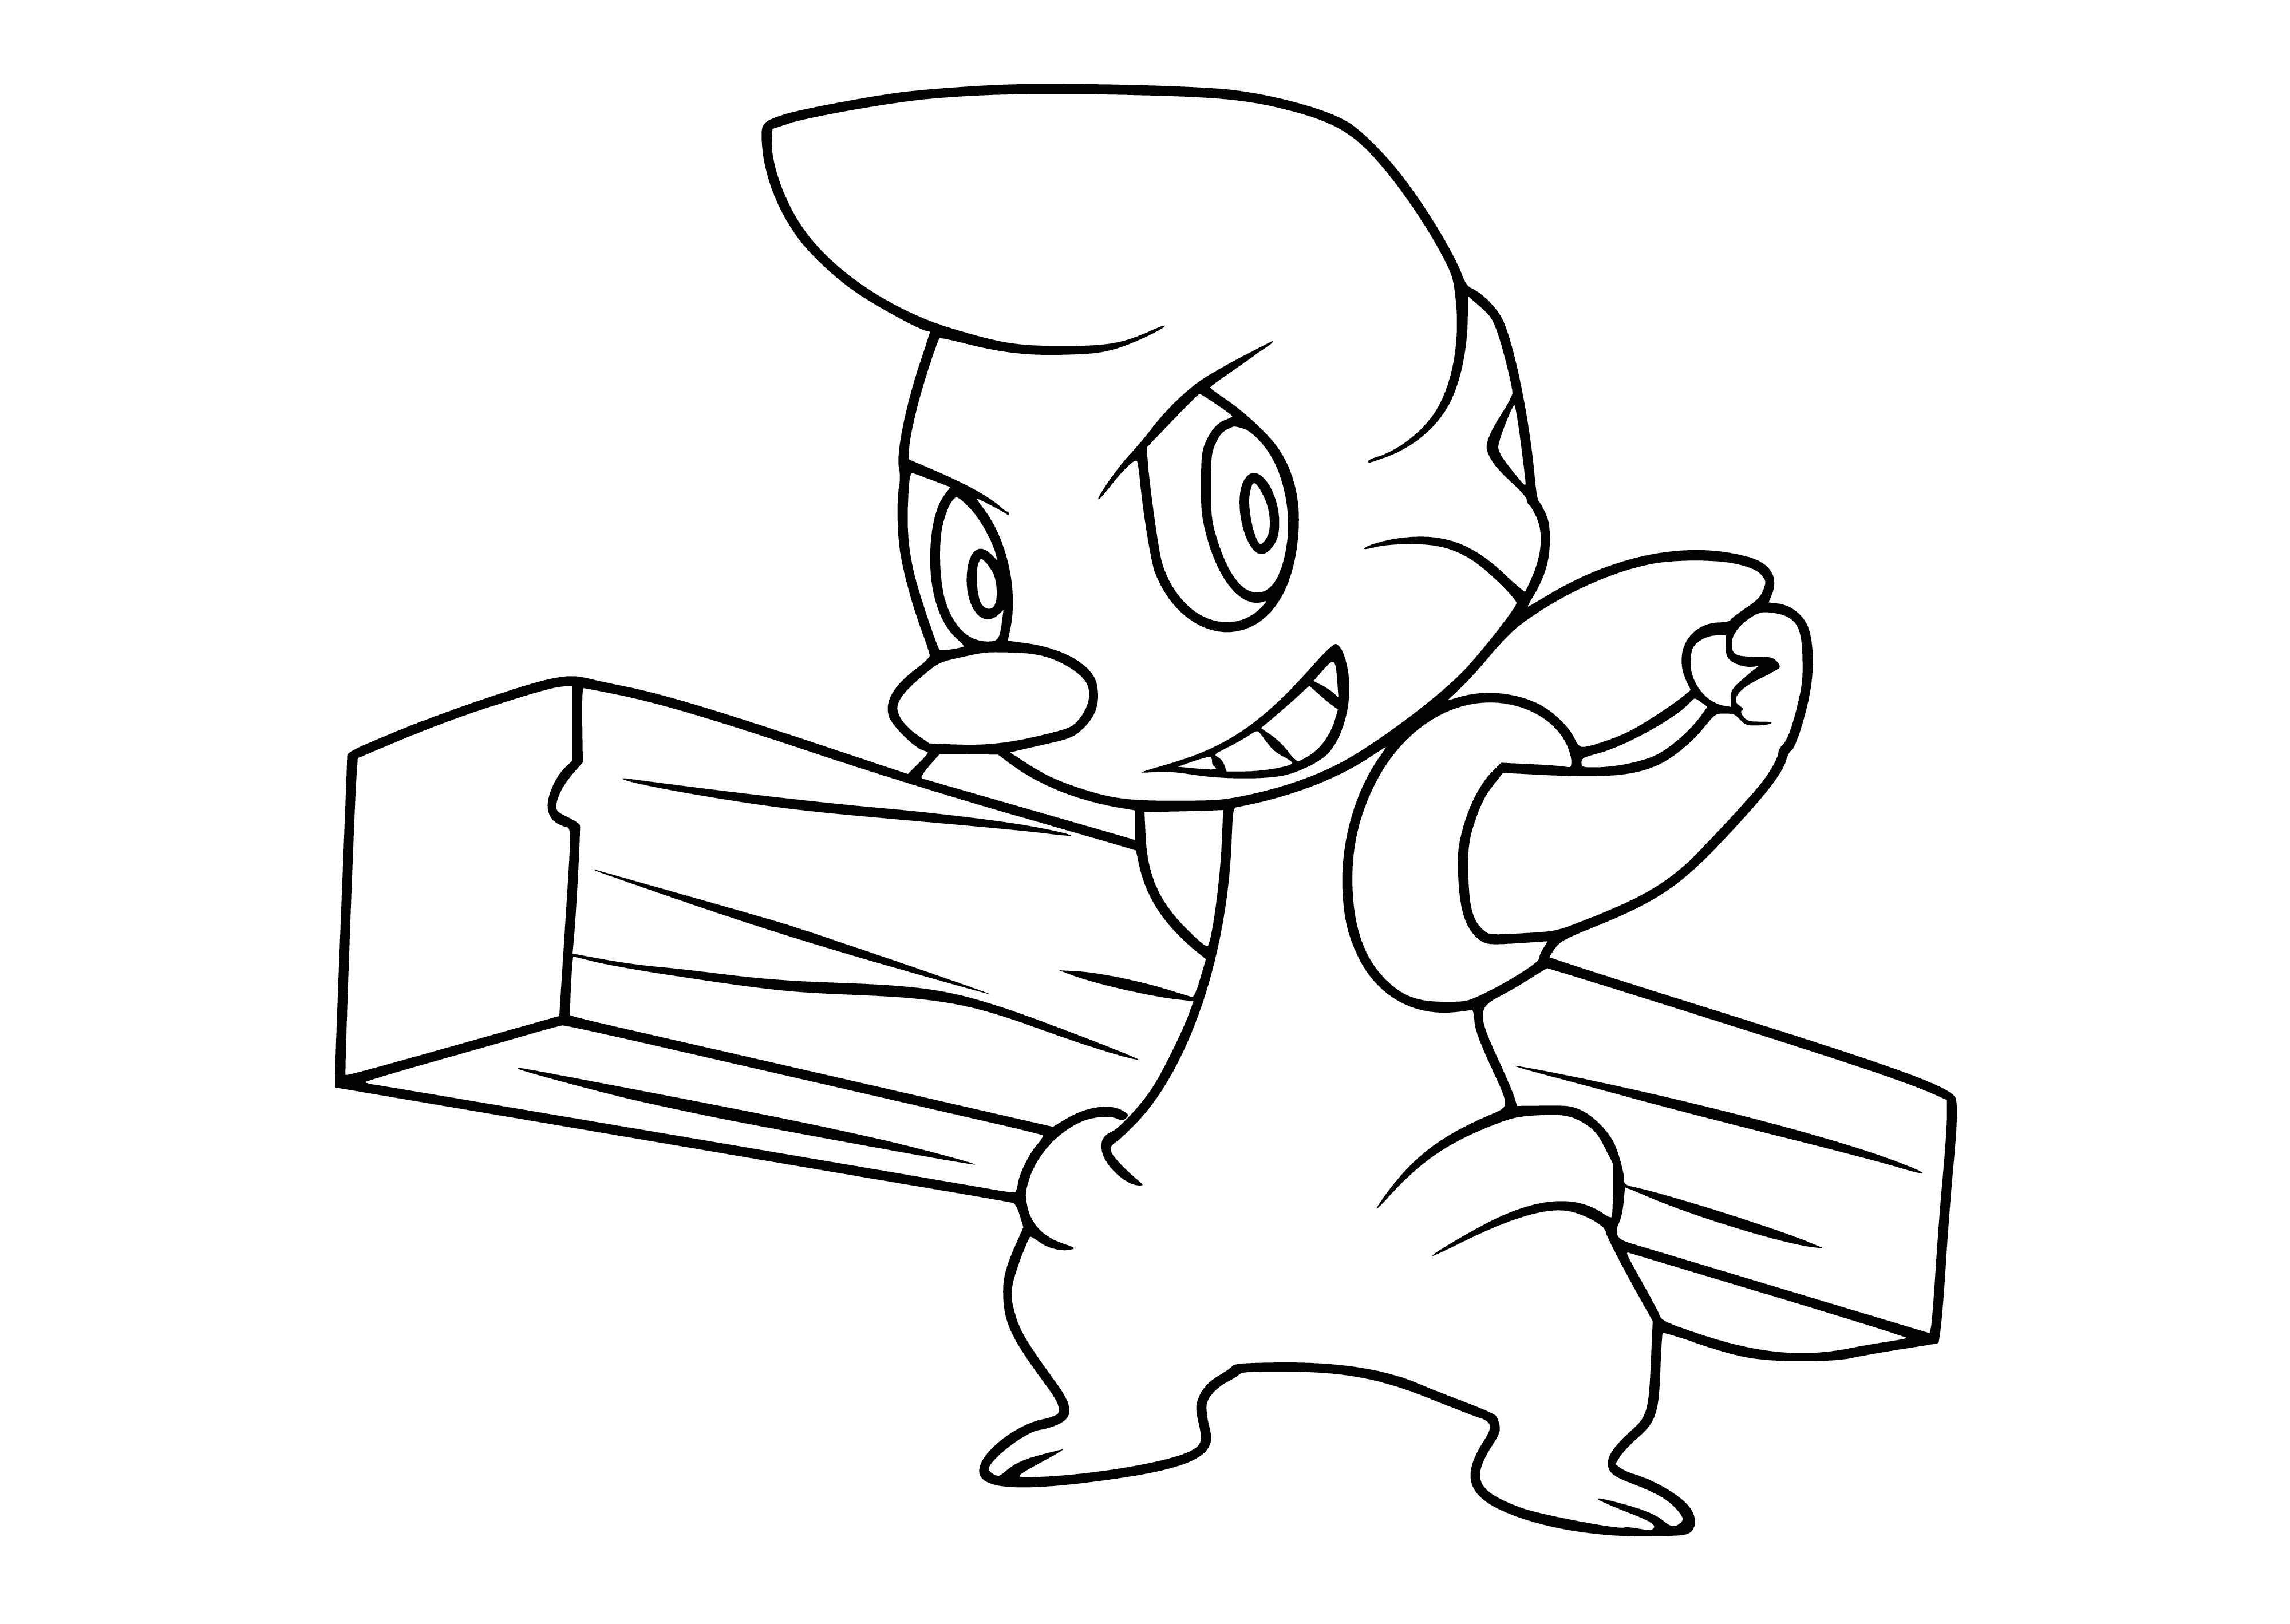 coloring page: Small blue-gray Pokemon with red nose and cheeks, two eyes, two spots on back, 3-fingered hands, black feet and short black tail.